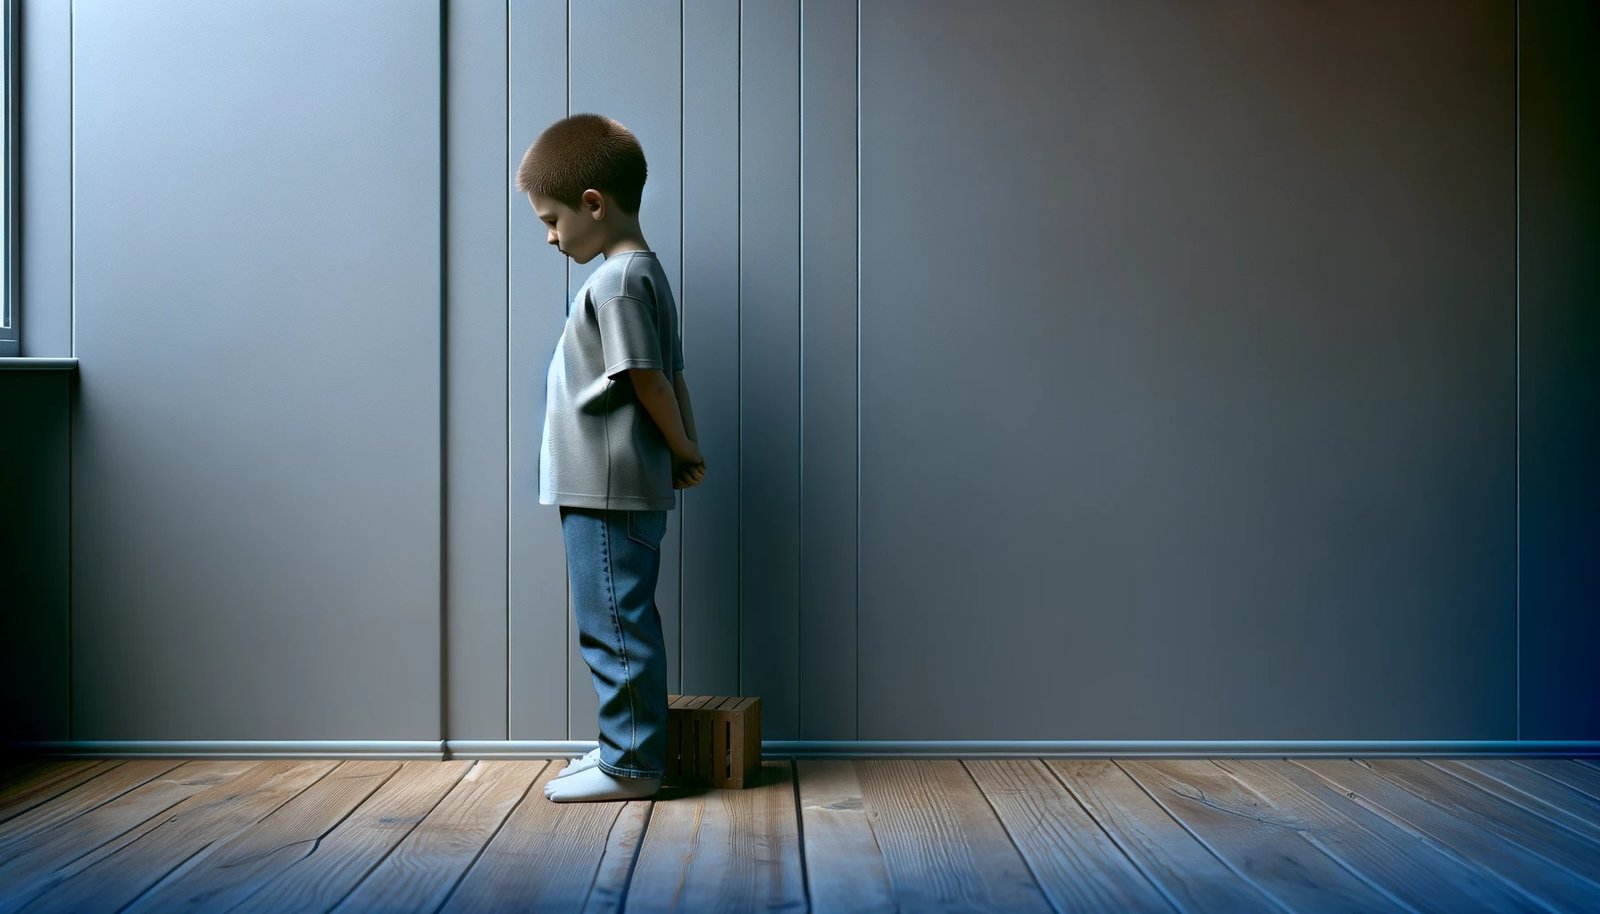 A young boy standing in a timeout corner of a dimly lit room.